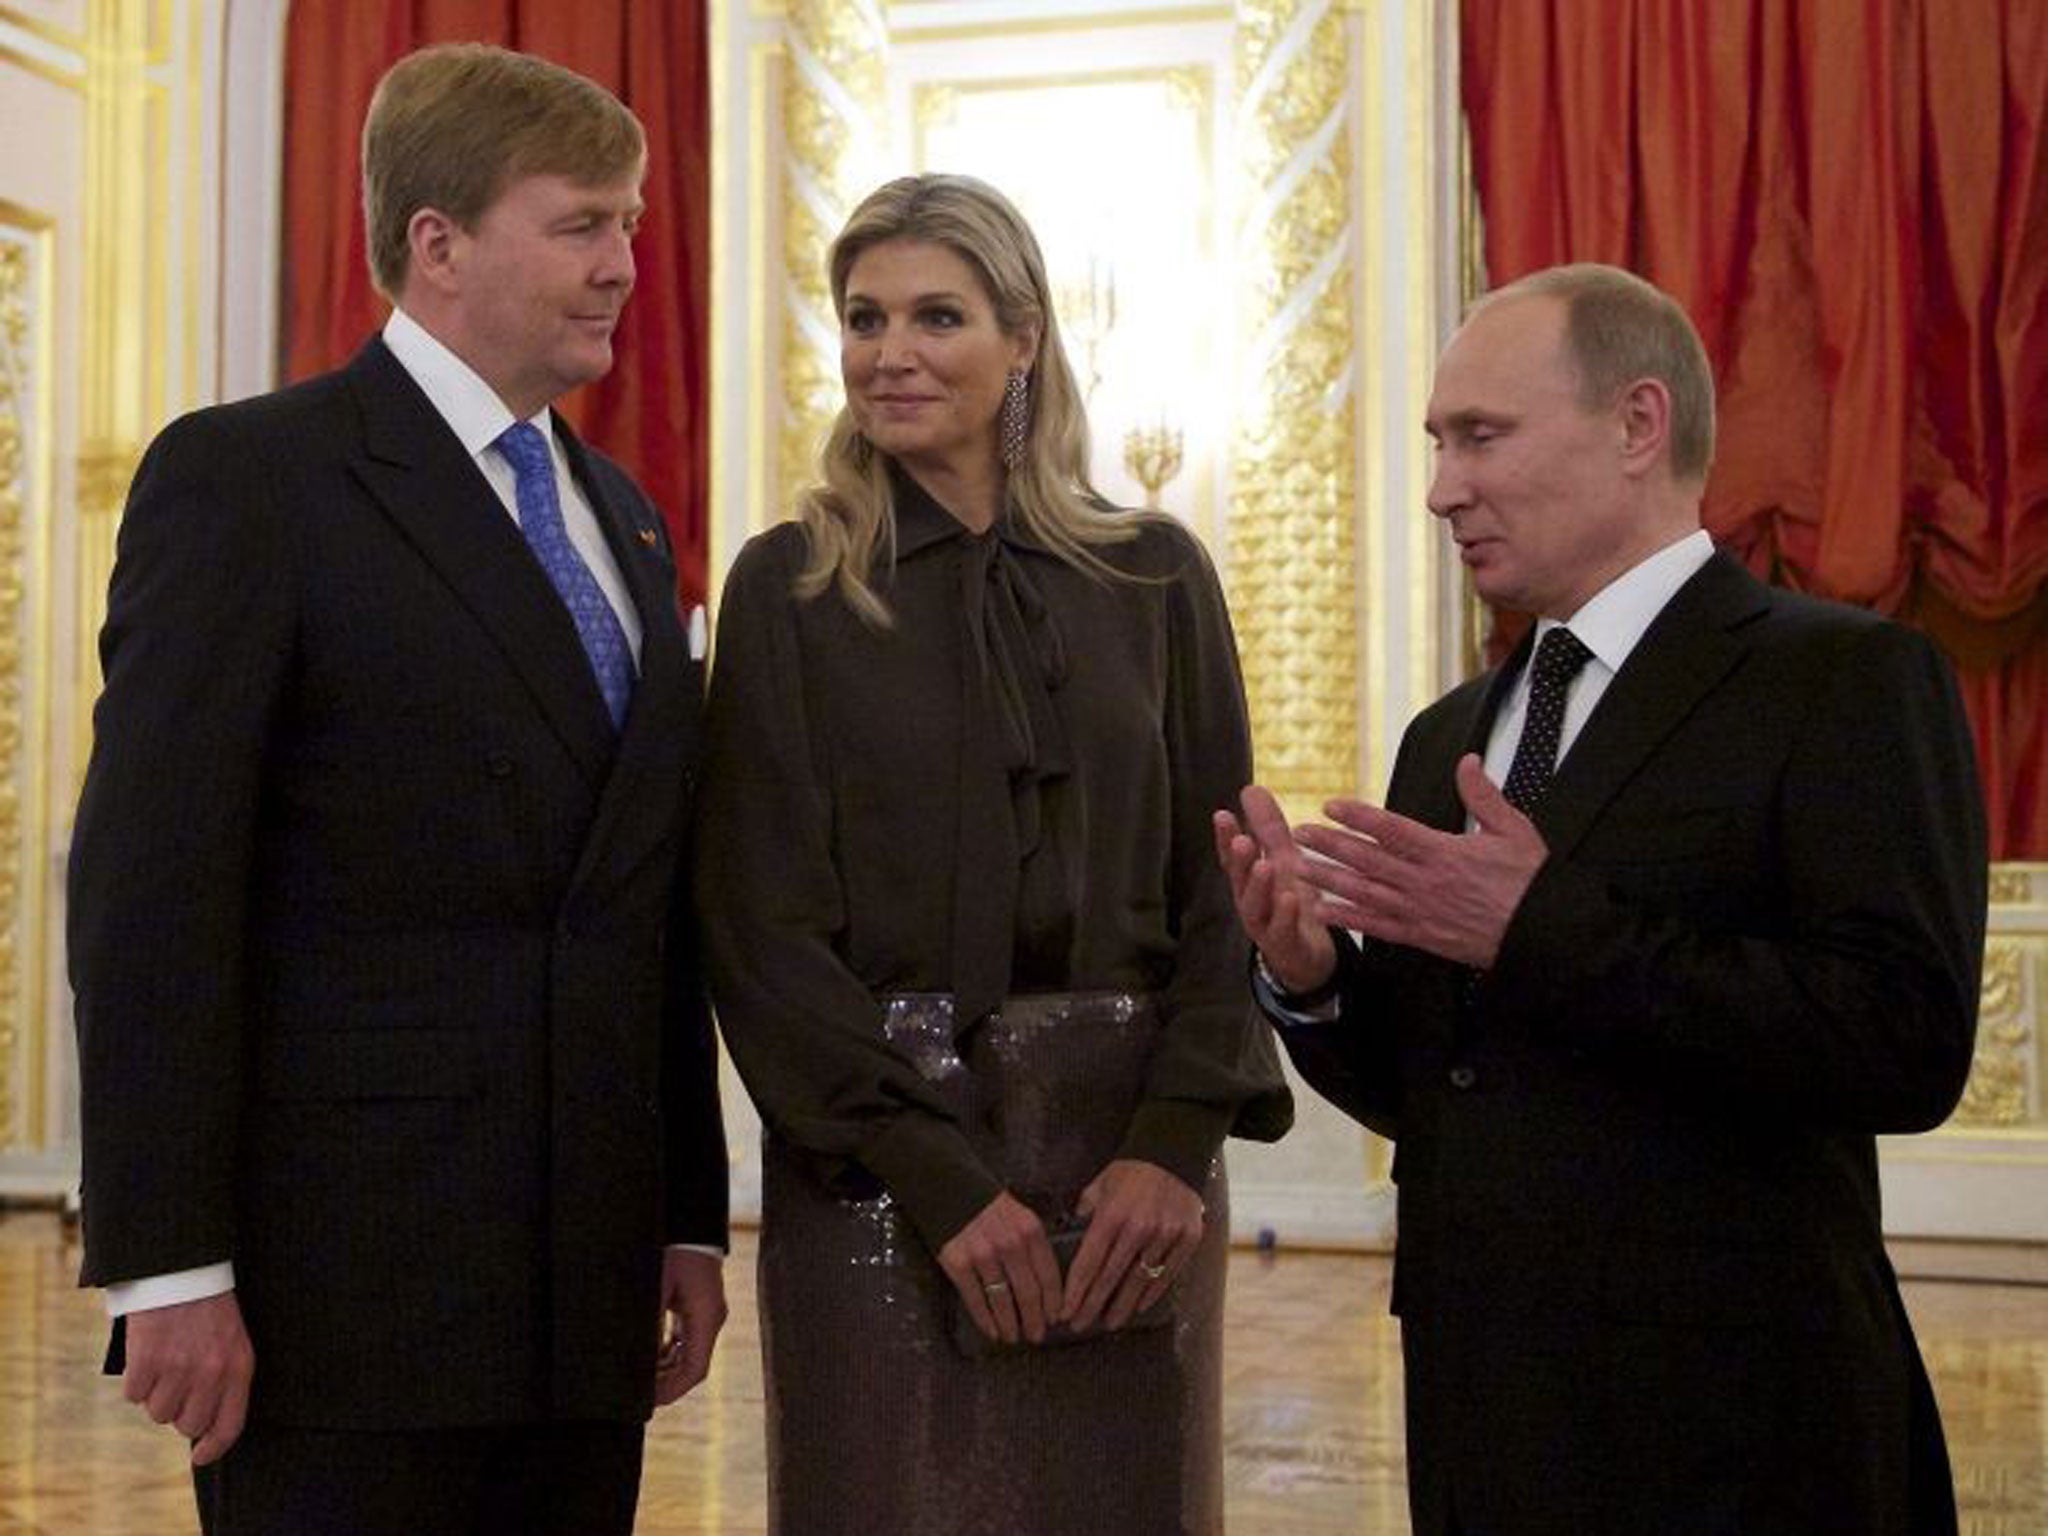 Russian President Vladimir Putin (R) speaking to King Willem-Alexander of the Netherlands (L) and Queen Maxima during their meeting in the Kremlin in Moscow, on Friday